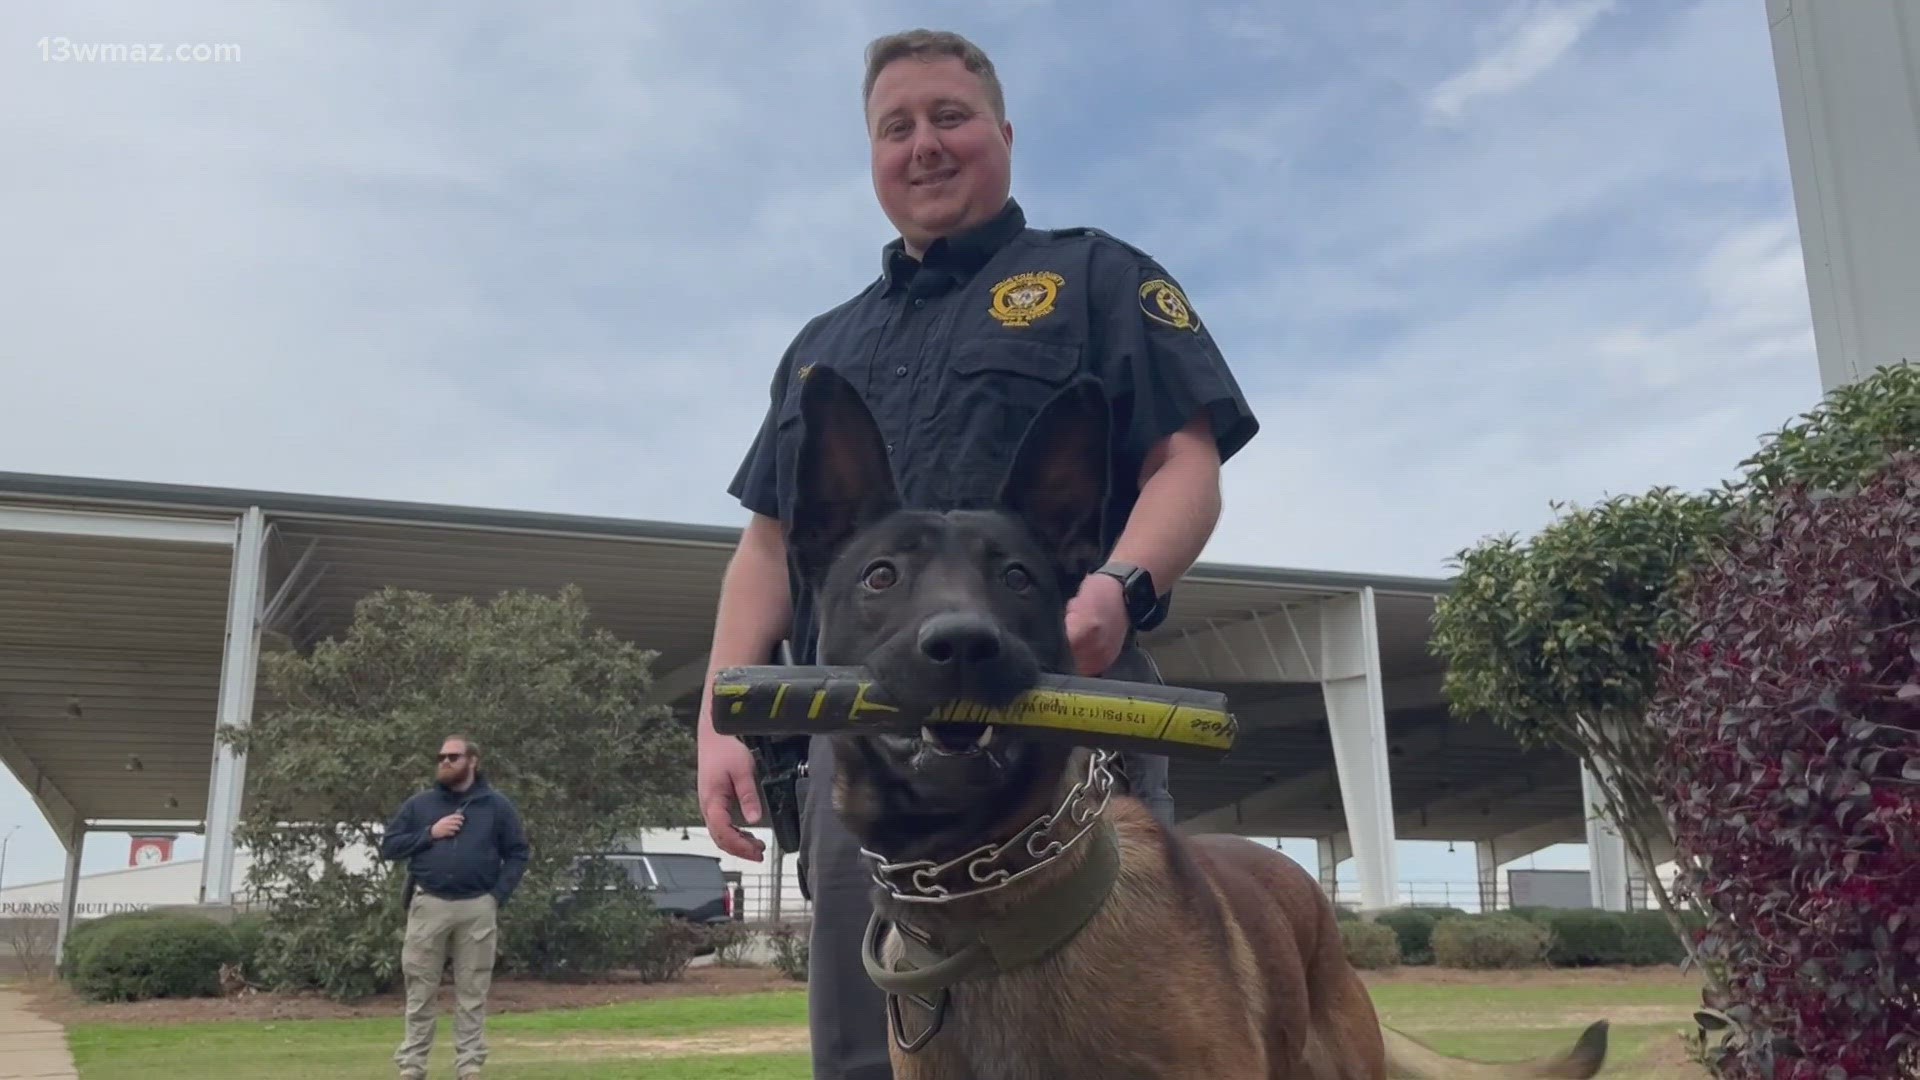 The National Narcotics Detector Dog Association held their first conference in Georgia, right in Warner Robins. Each canine gets 30 days of standard training.